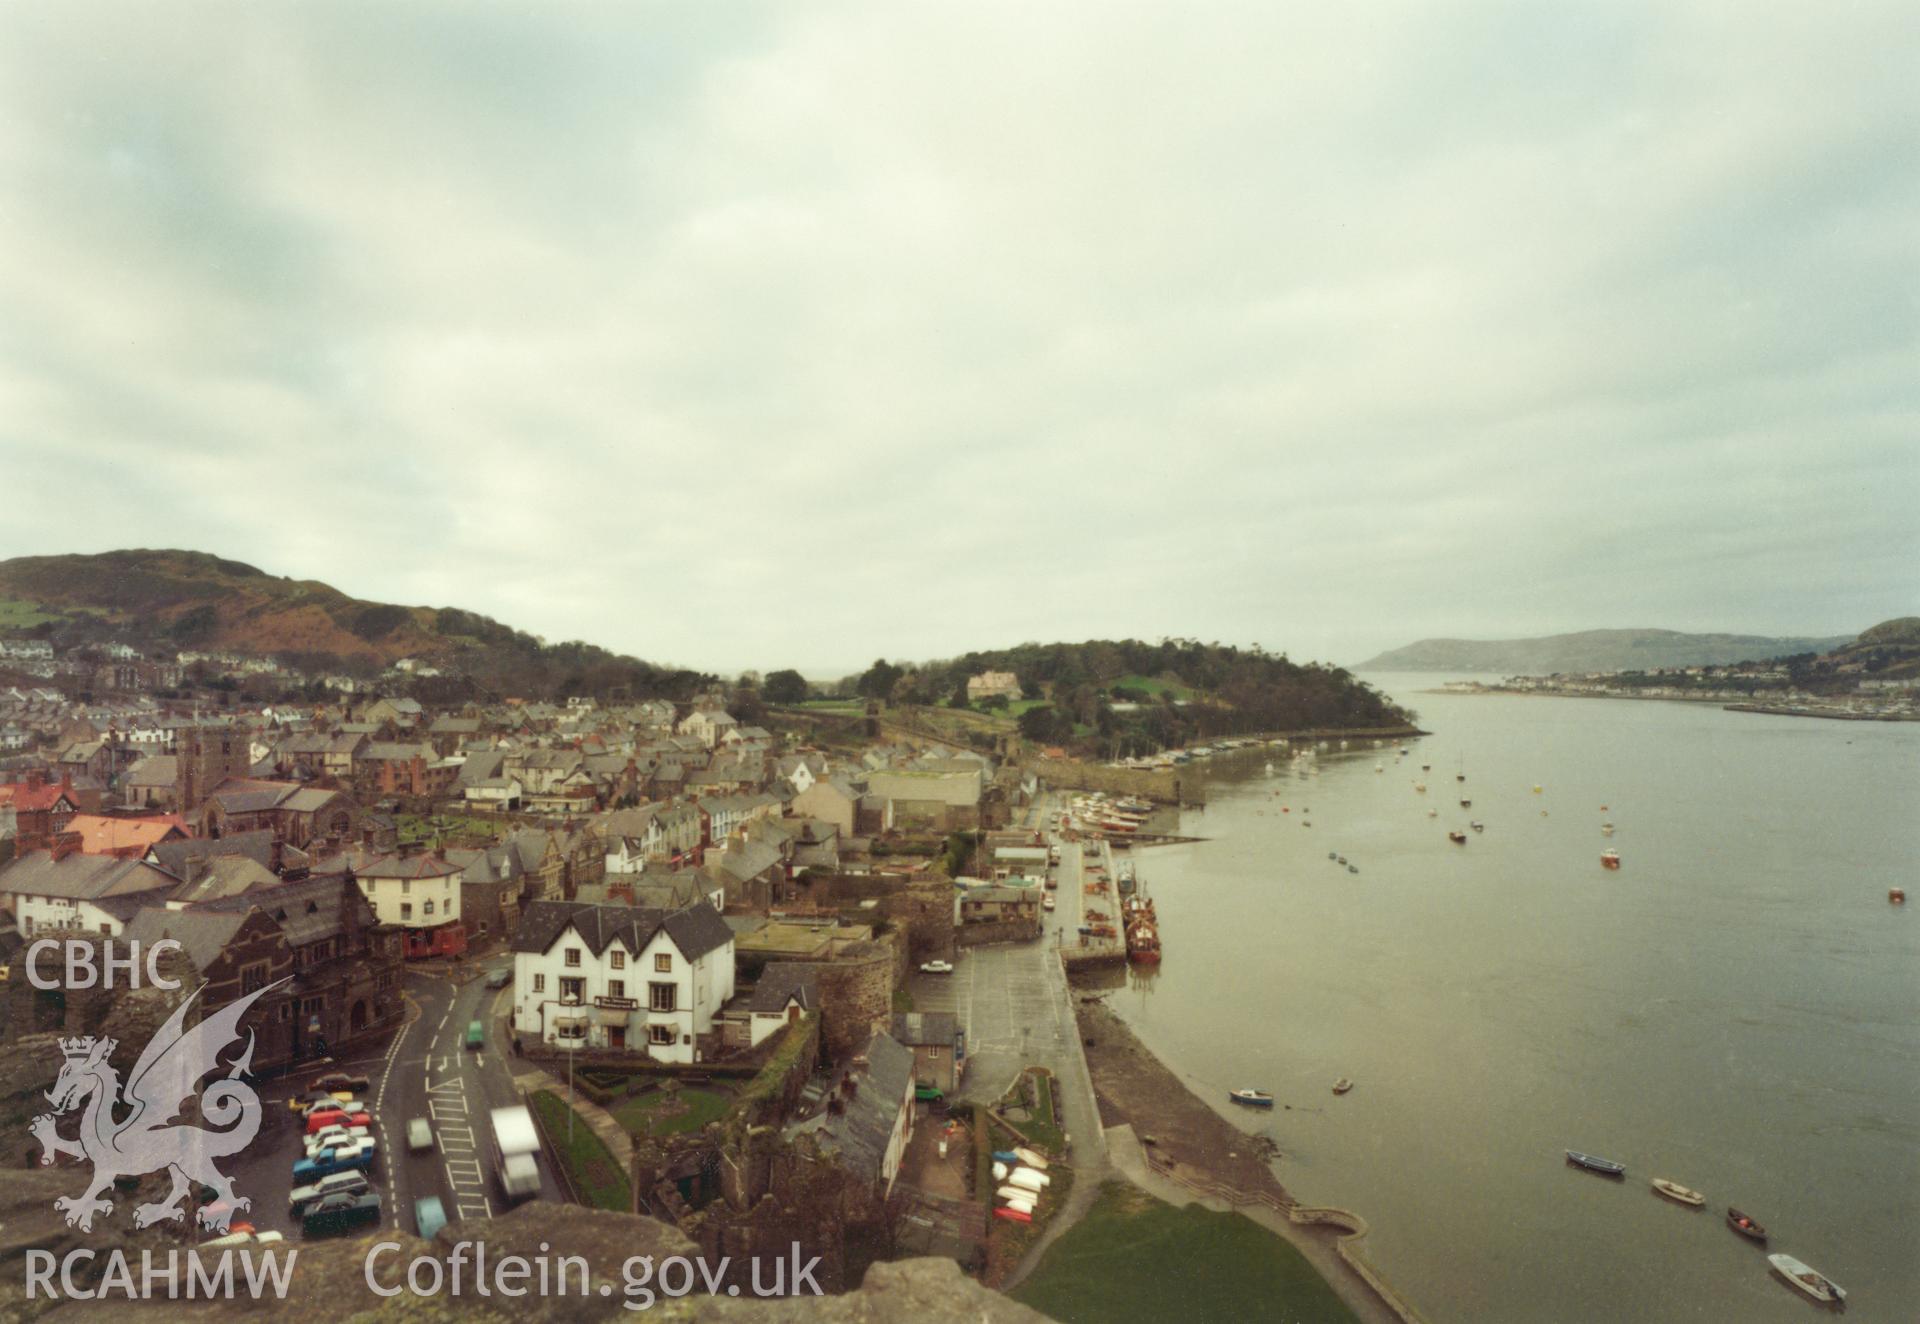 1 of a set of 27 colour prints: print showing view of town from Conwy castle, collated by the former Central Office of Information.